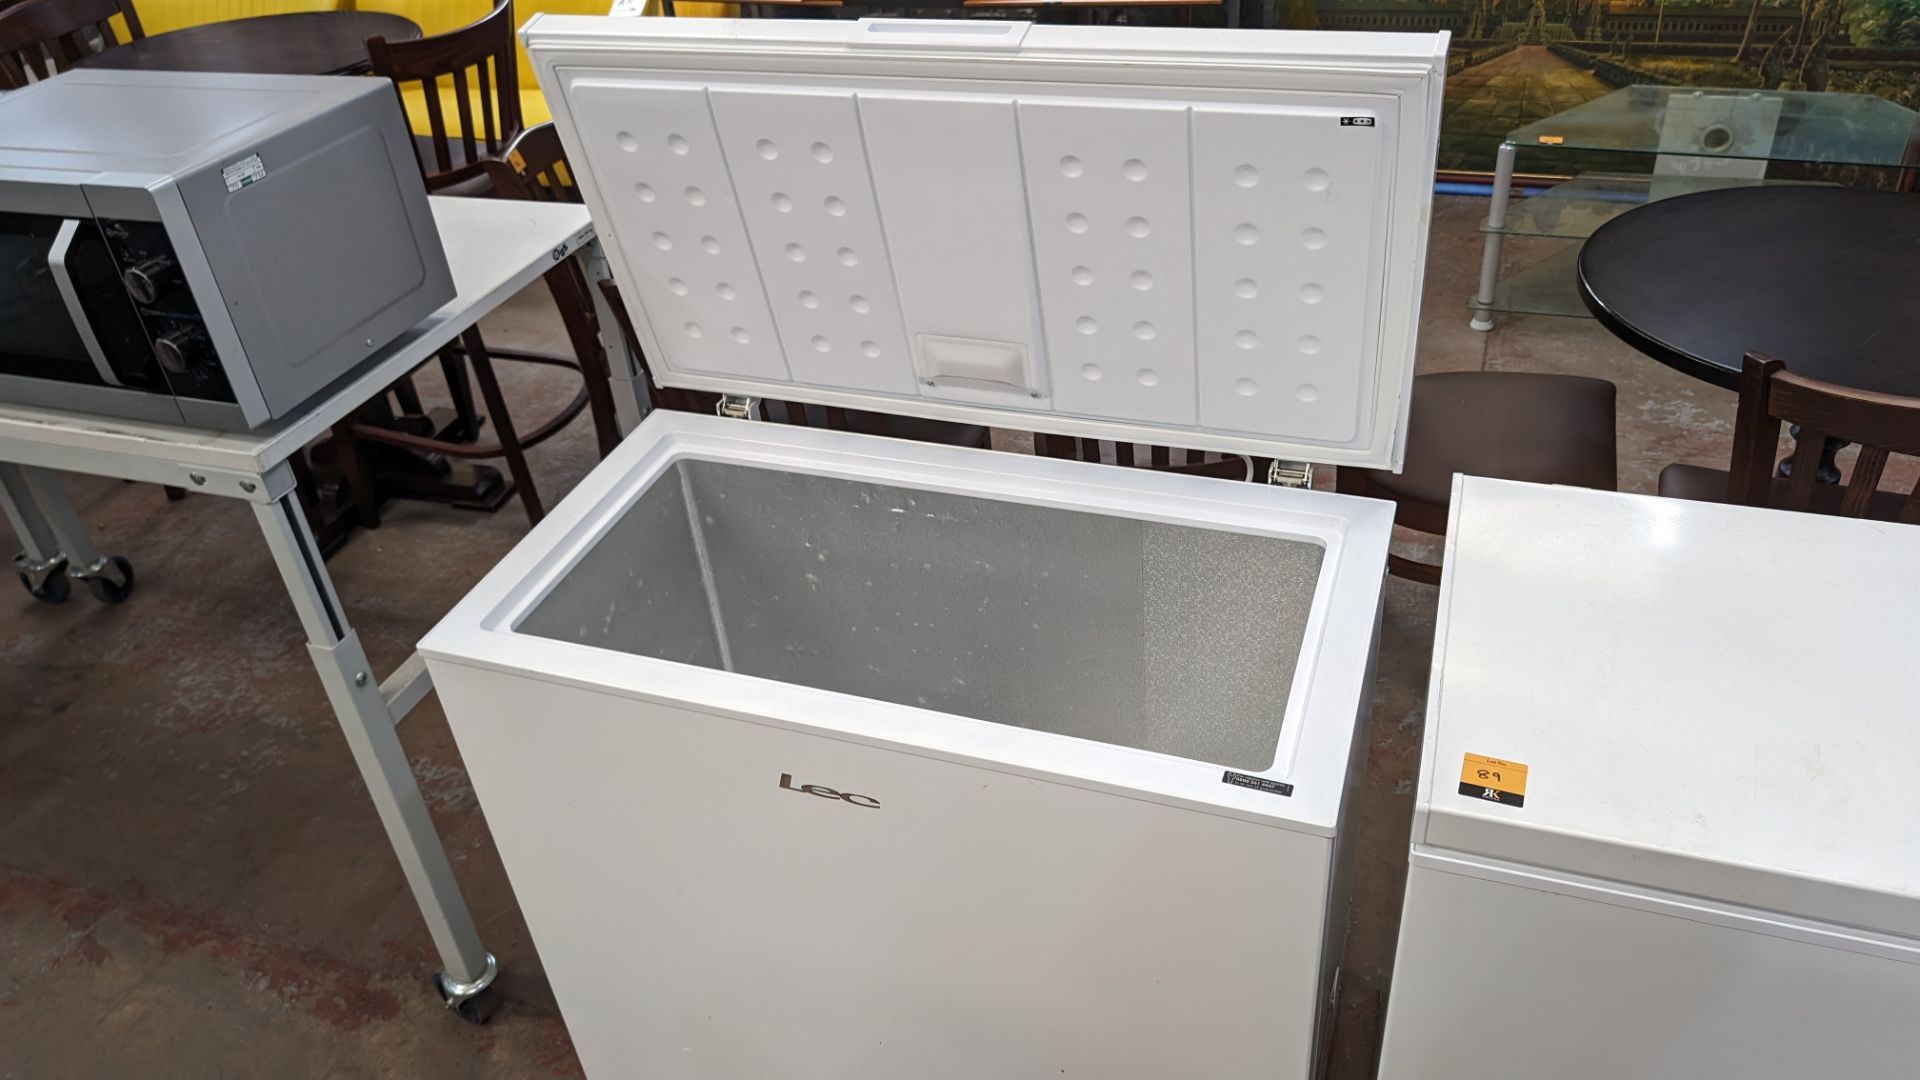 LEC electronic control chest freezer, measuring approximately 950mm long - Image 4 of 5